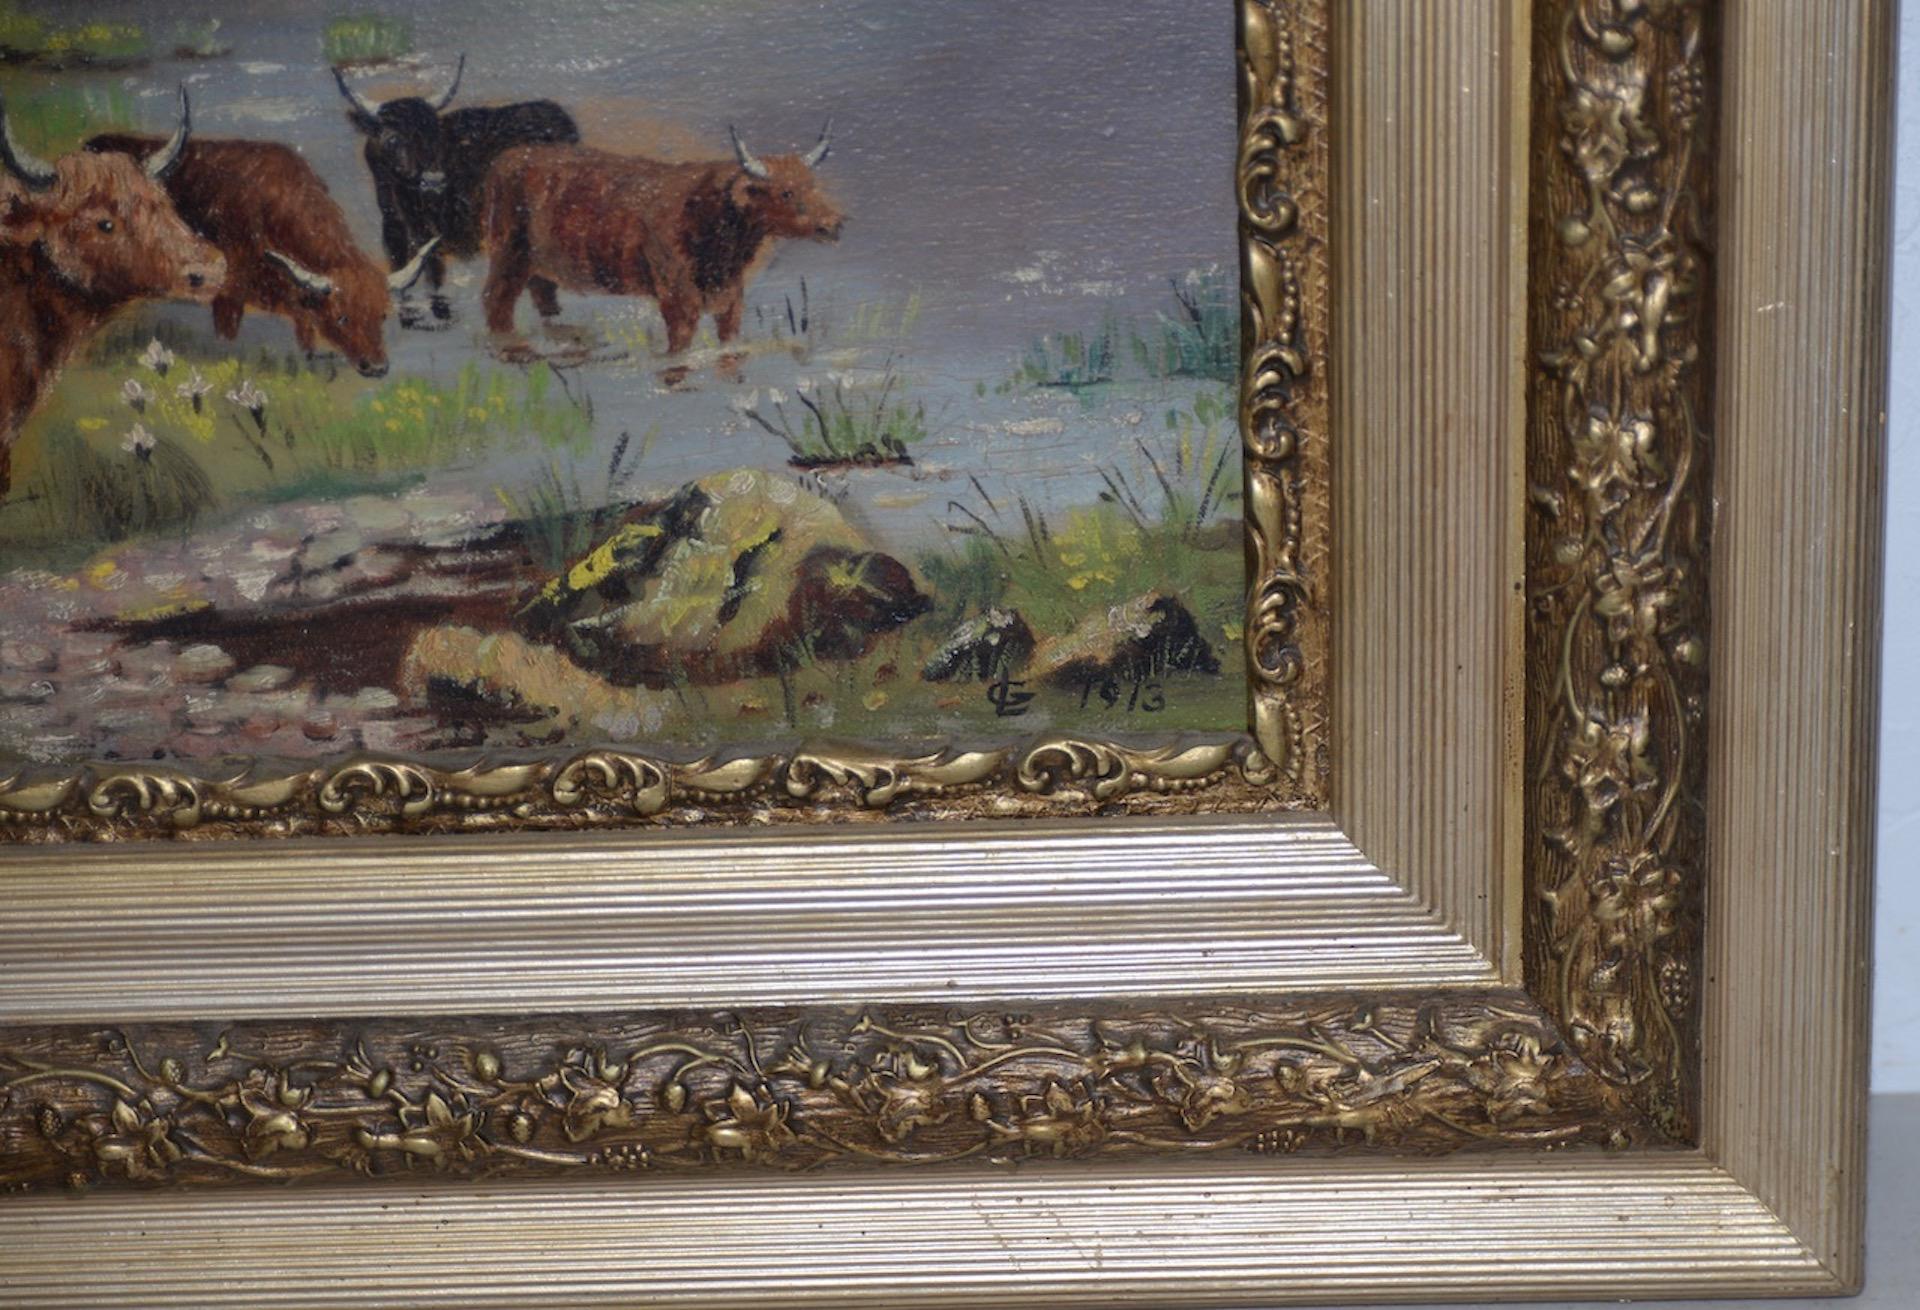 Early 20th century Scottish Highlands cattle oil painting, circa 1913.

Wonderful original oil painting of cattle in the Scottish Highlands on a cloudy day.

The painting is initialed and dated in the lower right corner.

Canvas dimensions 16